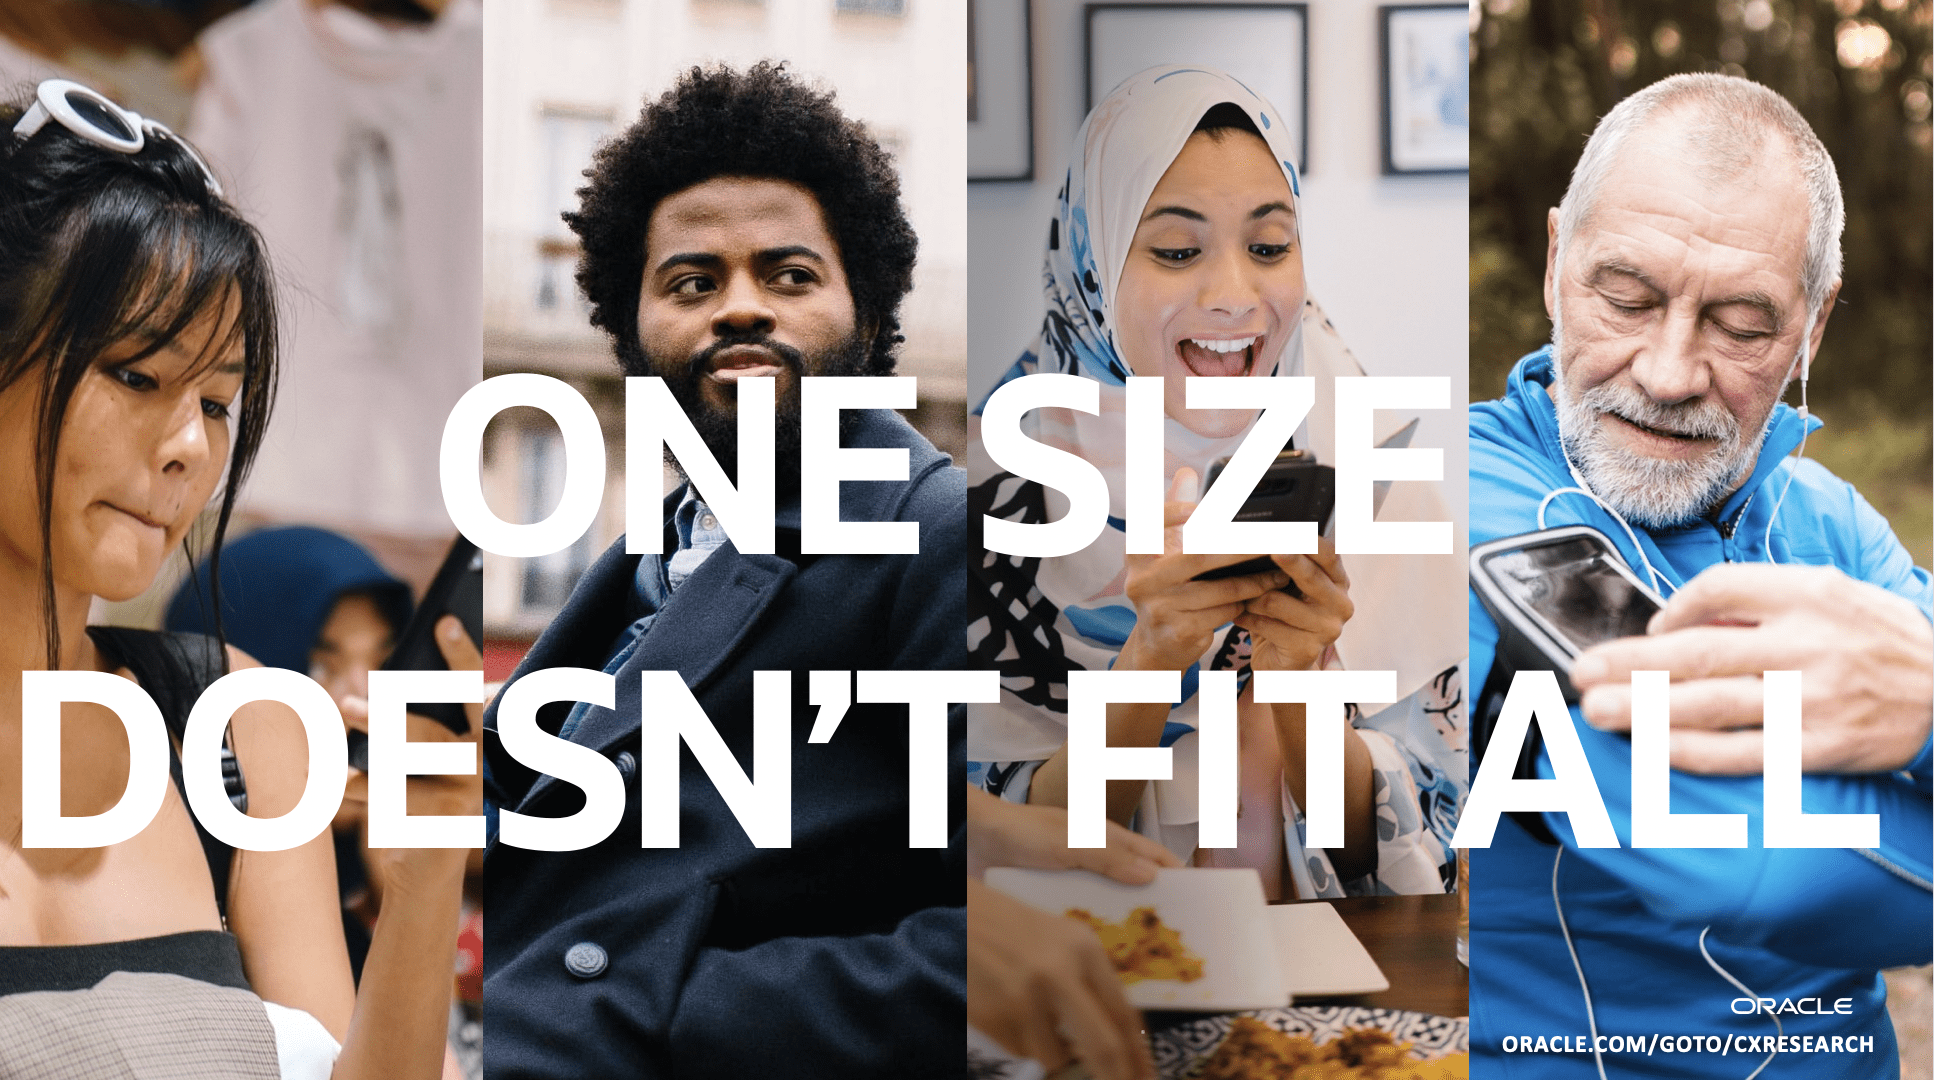 “One Size Doesn’t Fit All” Research Campaign